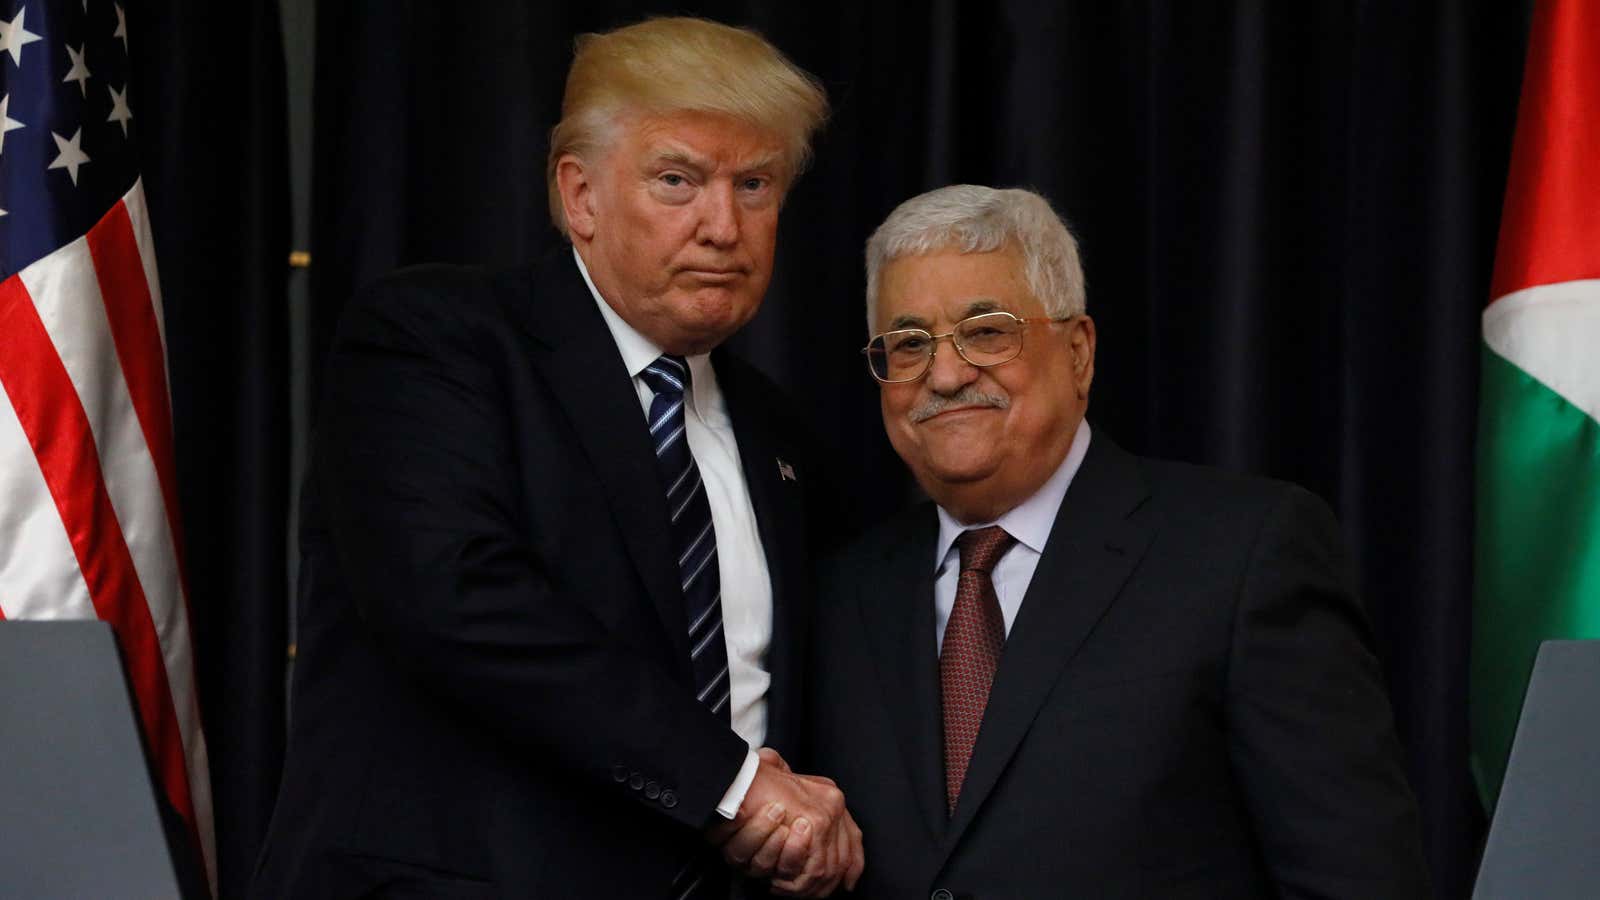 Donald Trump is not likely to shake the Palestinian Authority president’s hand again anytime soon.